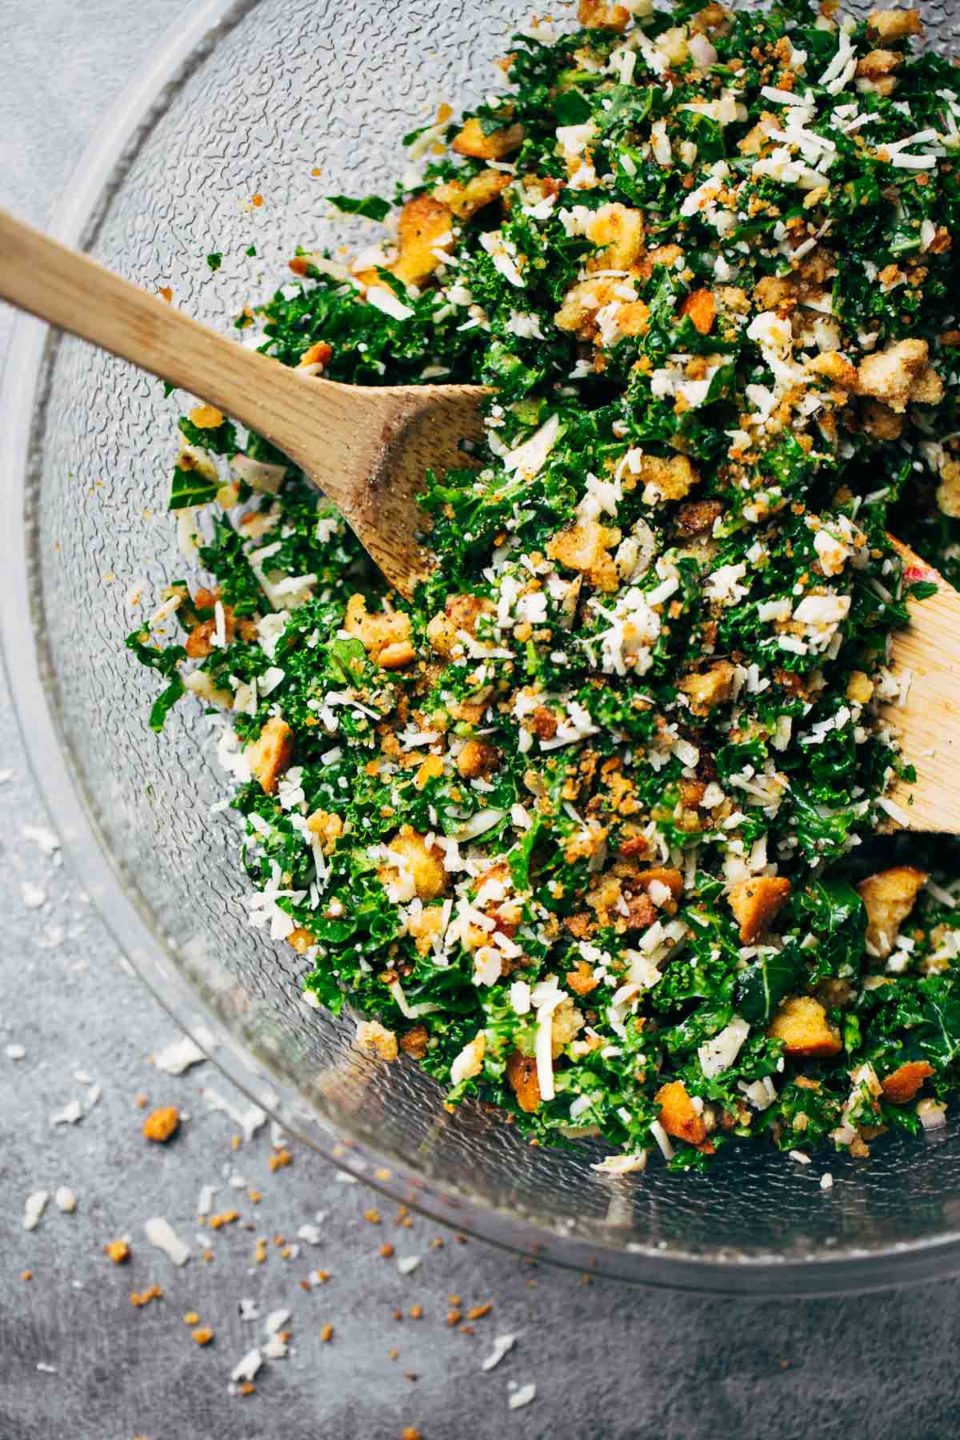 Toasted Bread and Parmesan Kale Salad Recipe - Pinch of Yum